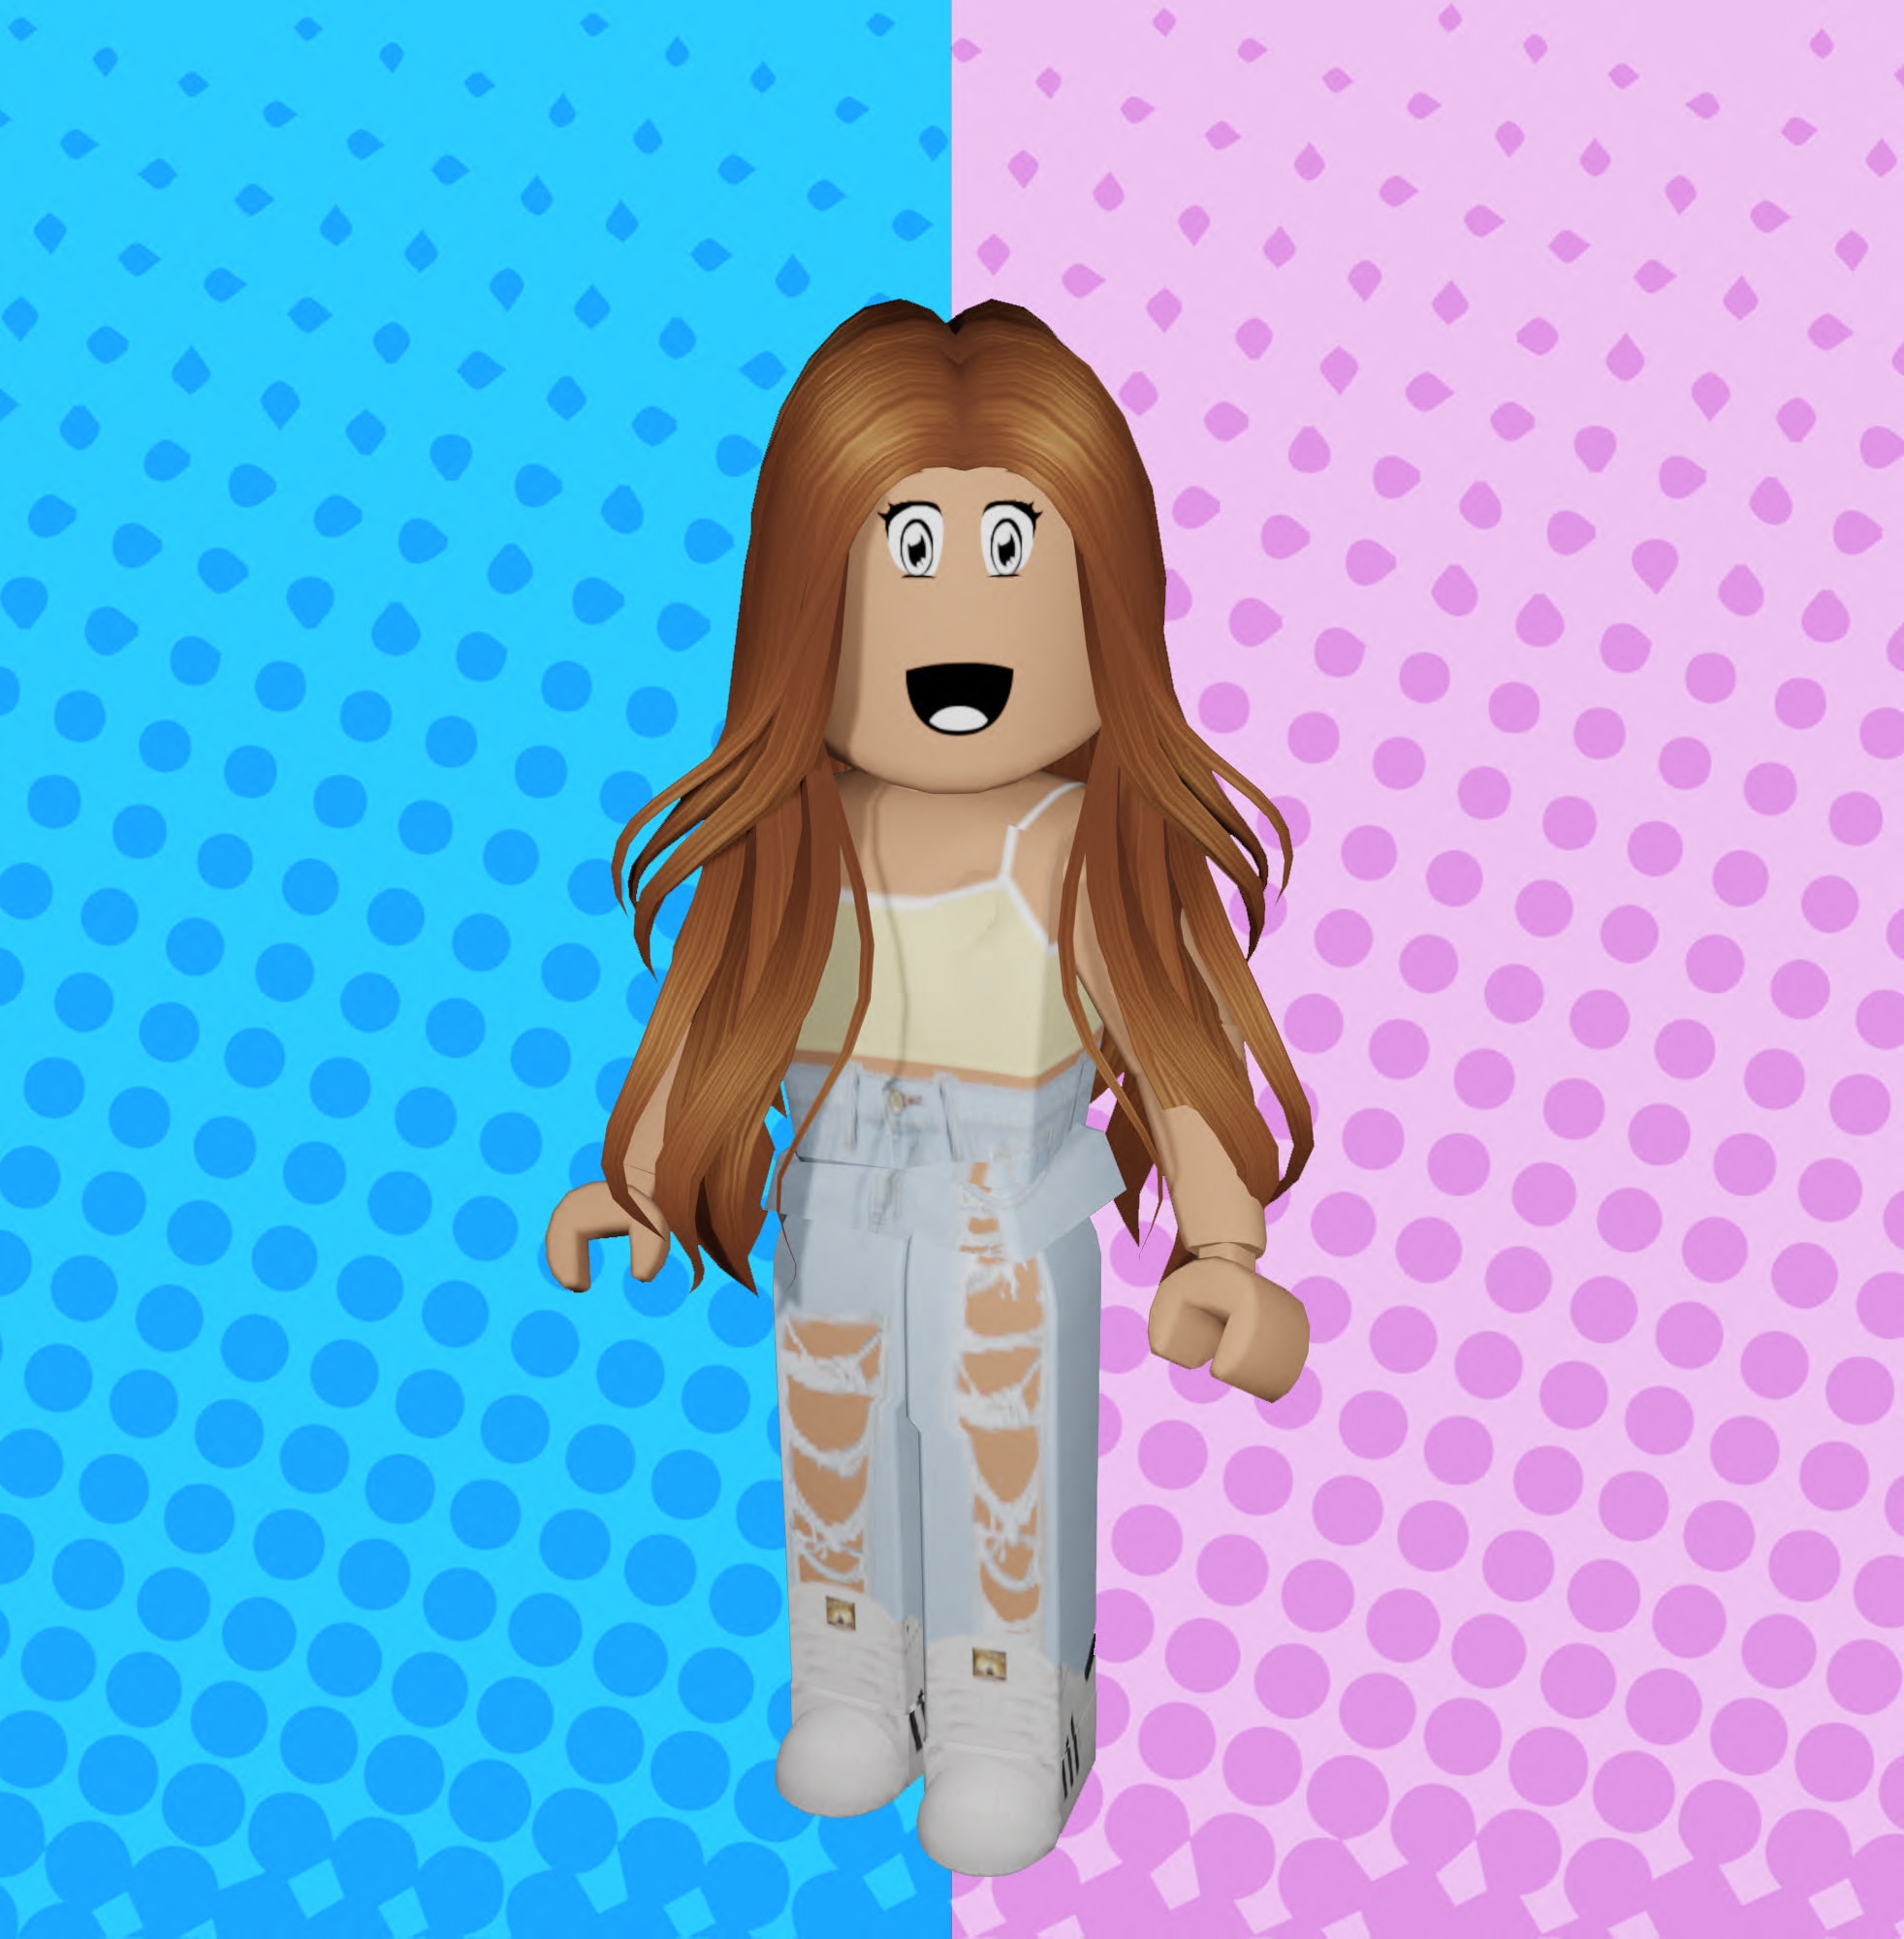 Make You A Roblox Gfx Picture By Eloypizza - robloxgfx instagram hashtag posts picoshots